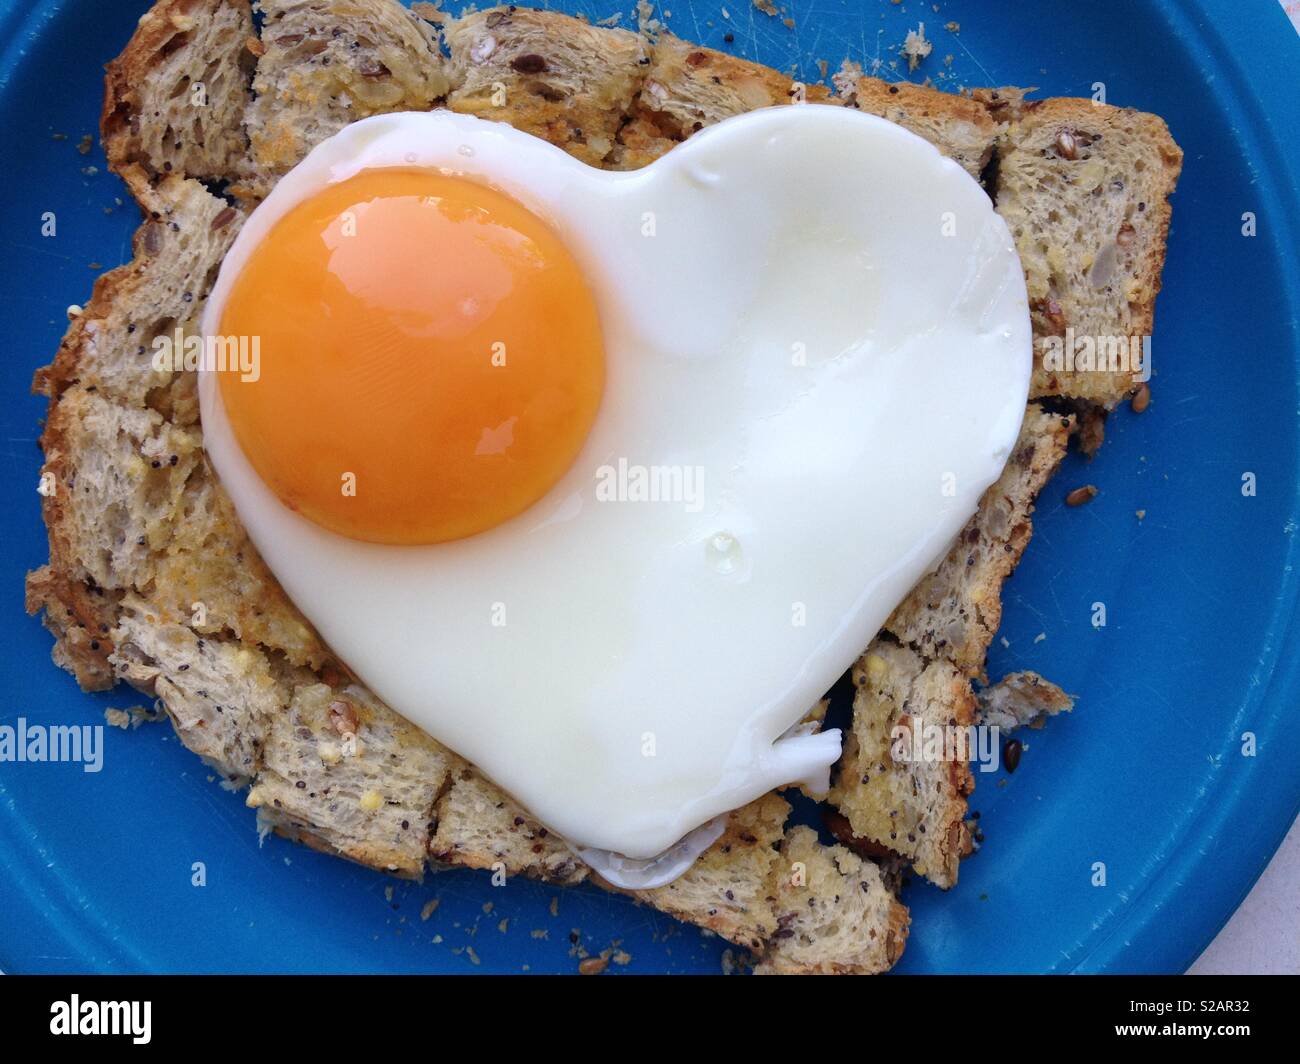 Fried egg on toast. The egg is in the shape of a healthy heart to imply a healthy diet and good well being.. Stock Photo